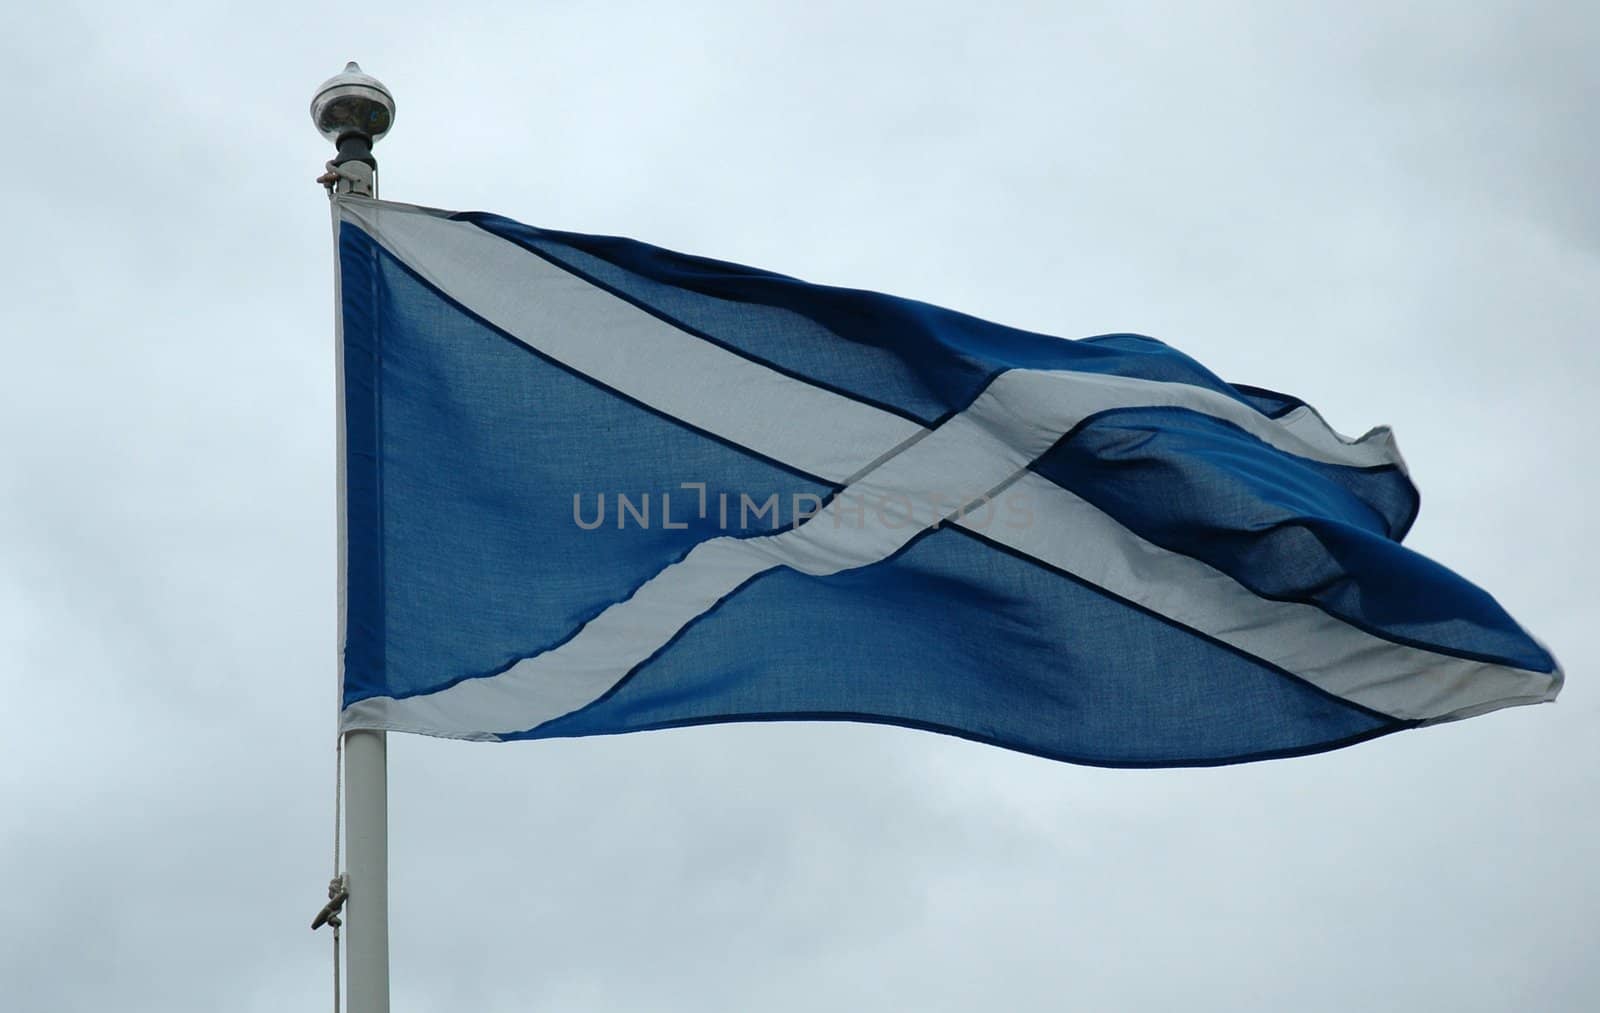 The Saltire - the flag of Scotland